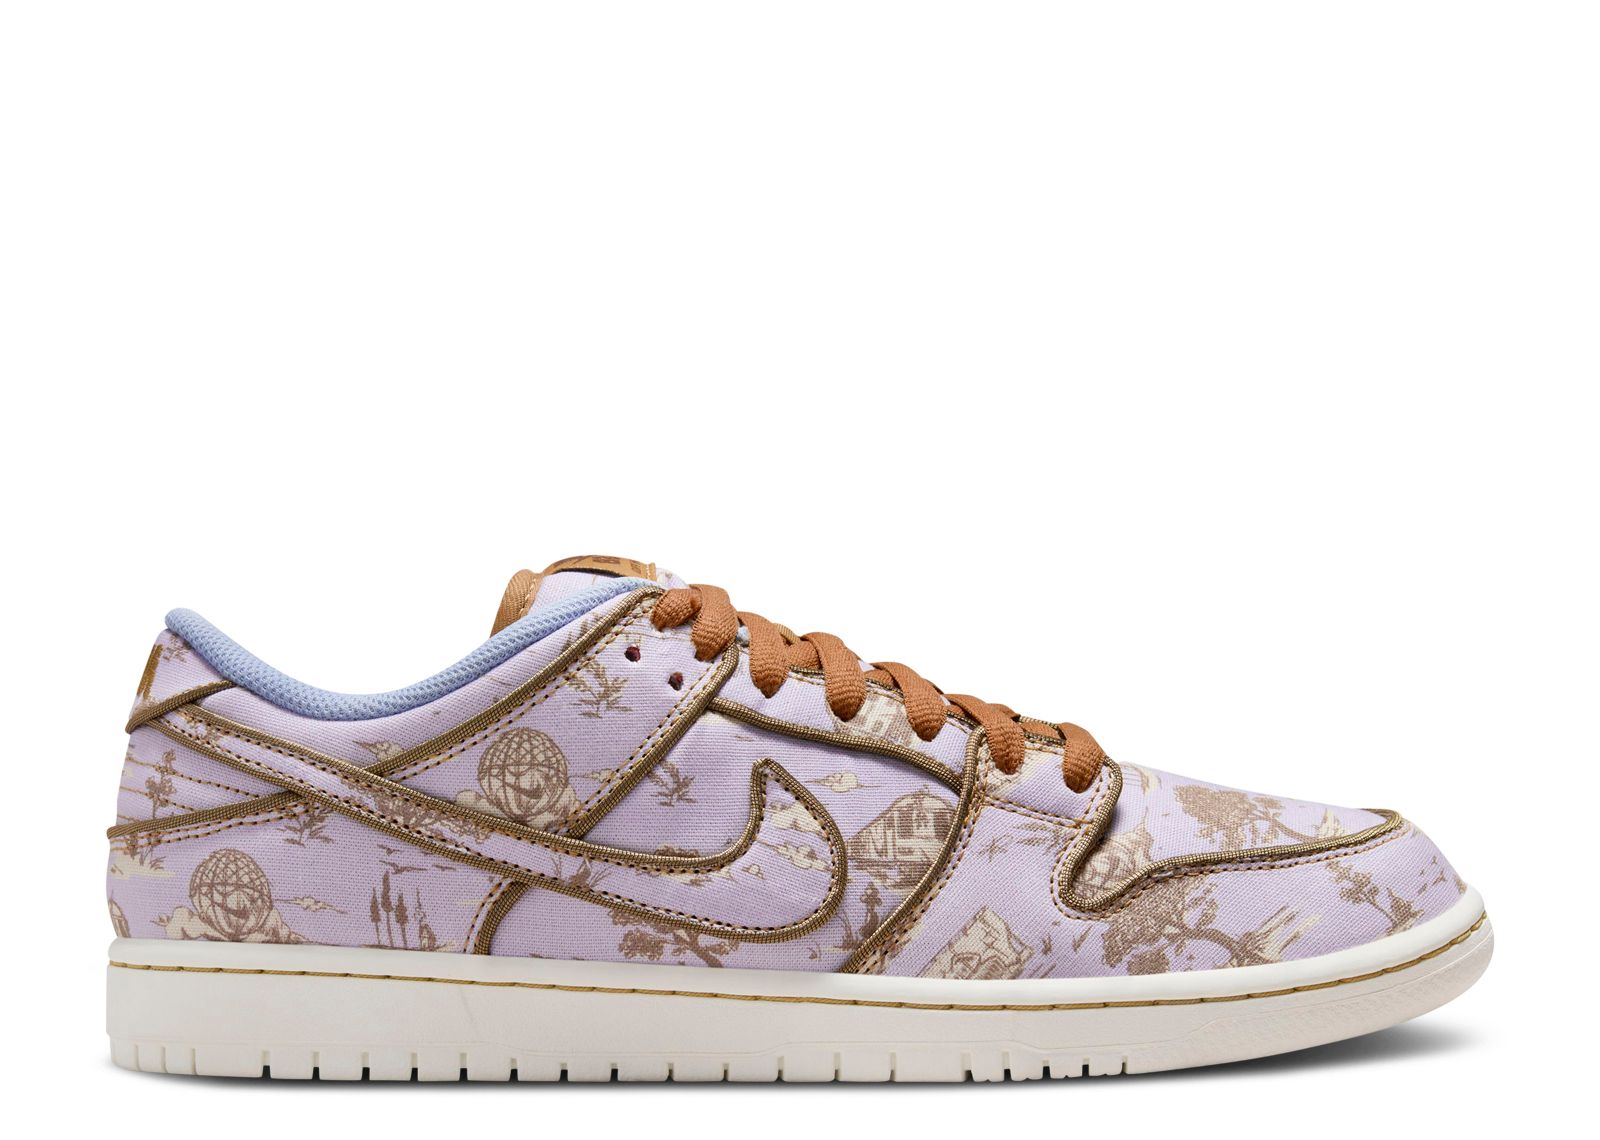 NIKE SB DUNK LOW “CITY OF STYLE”